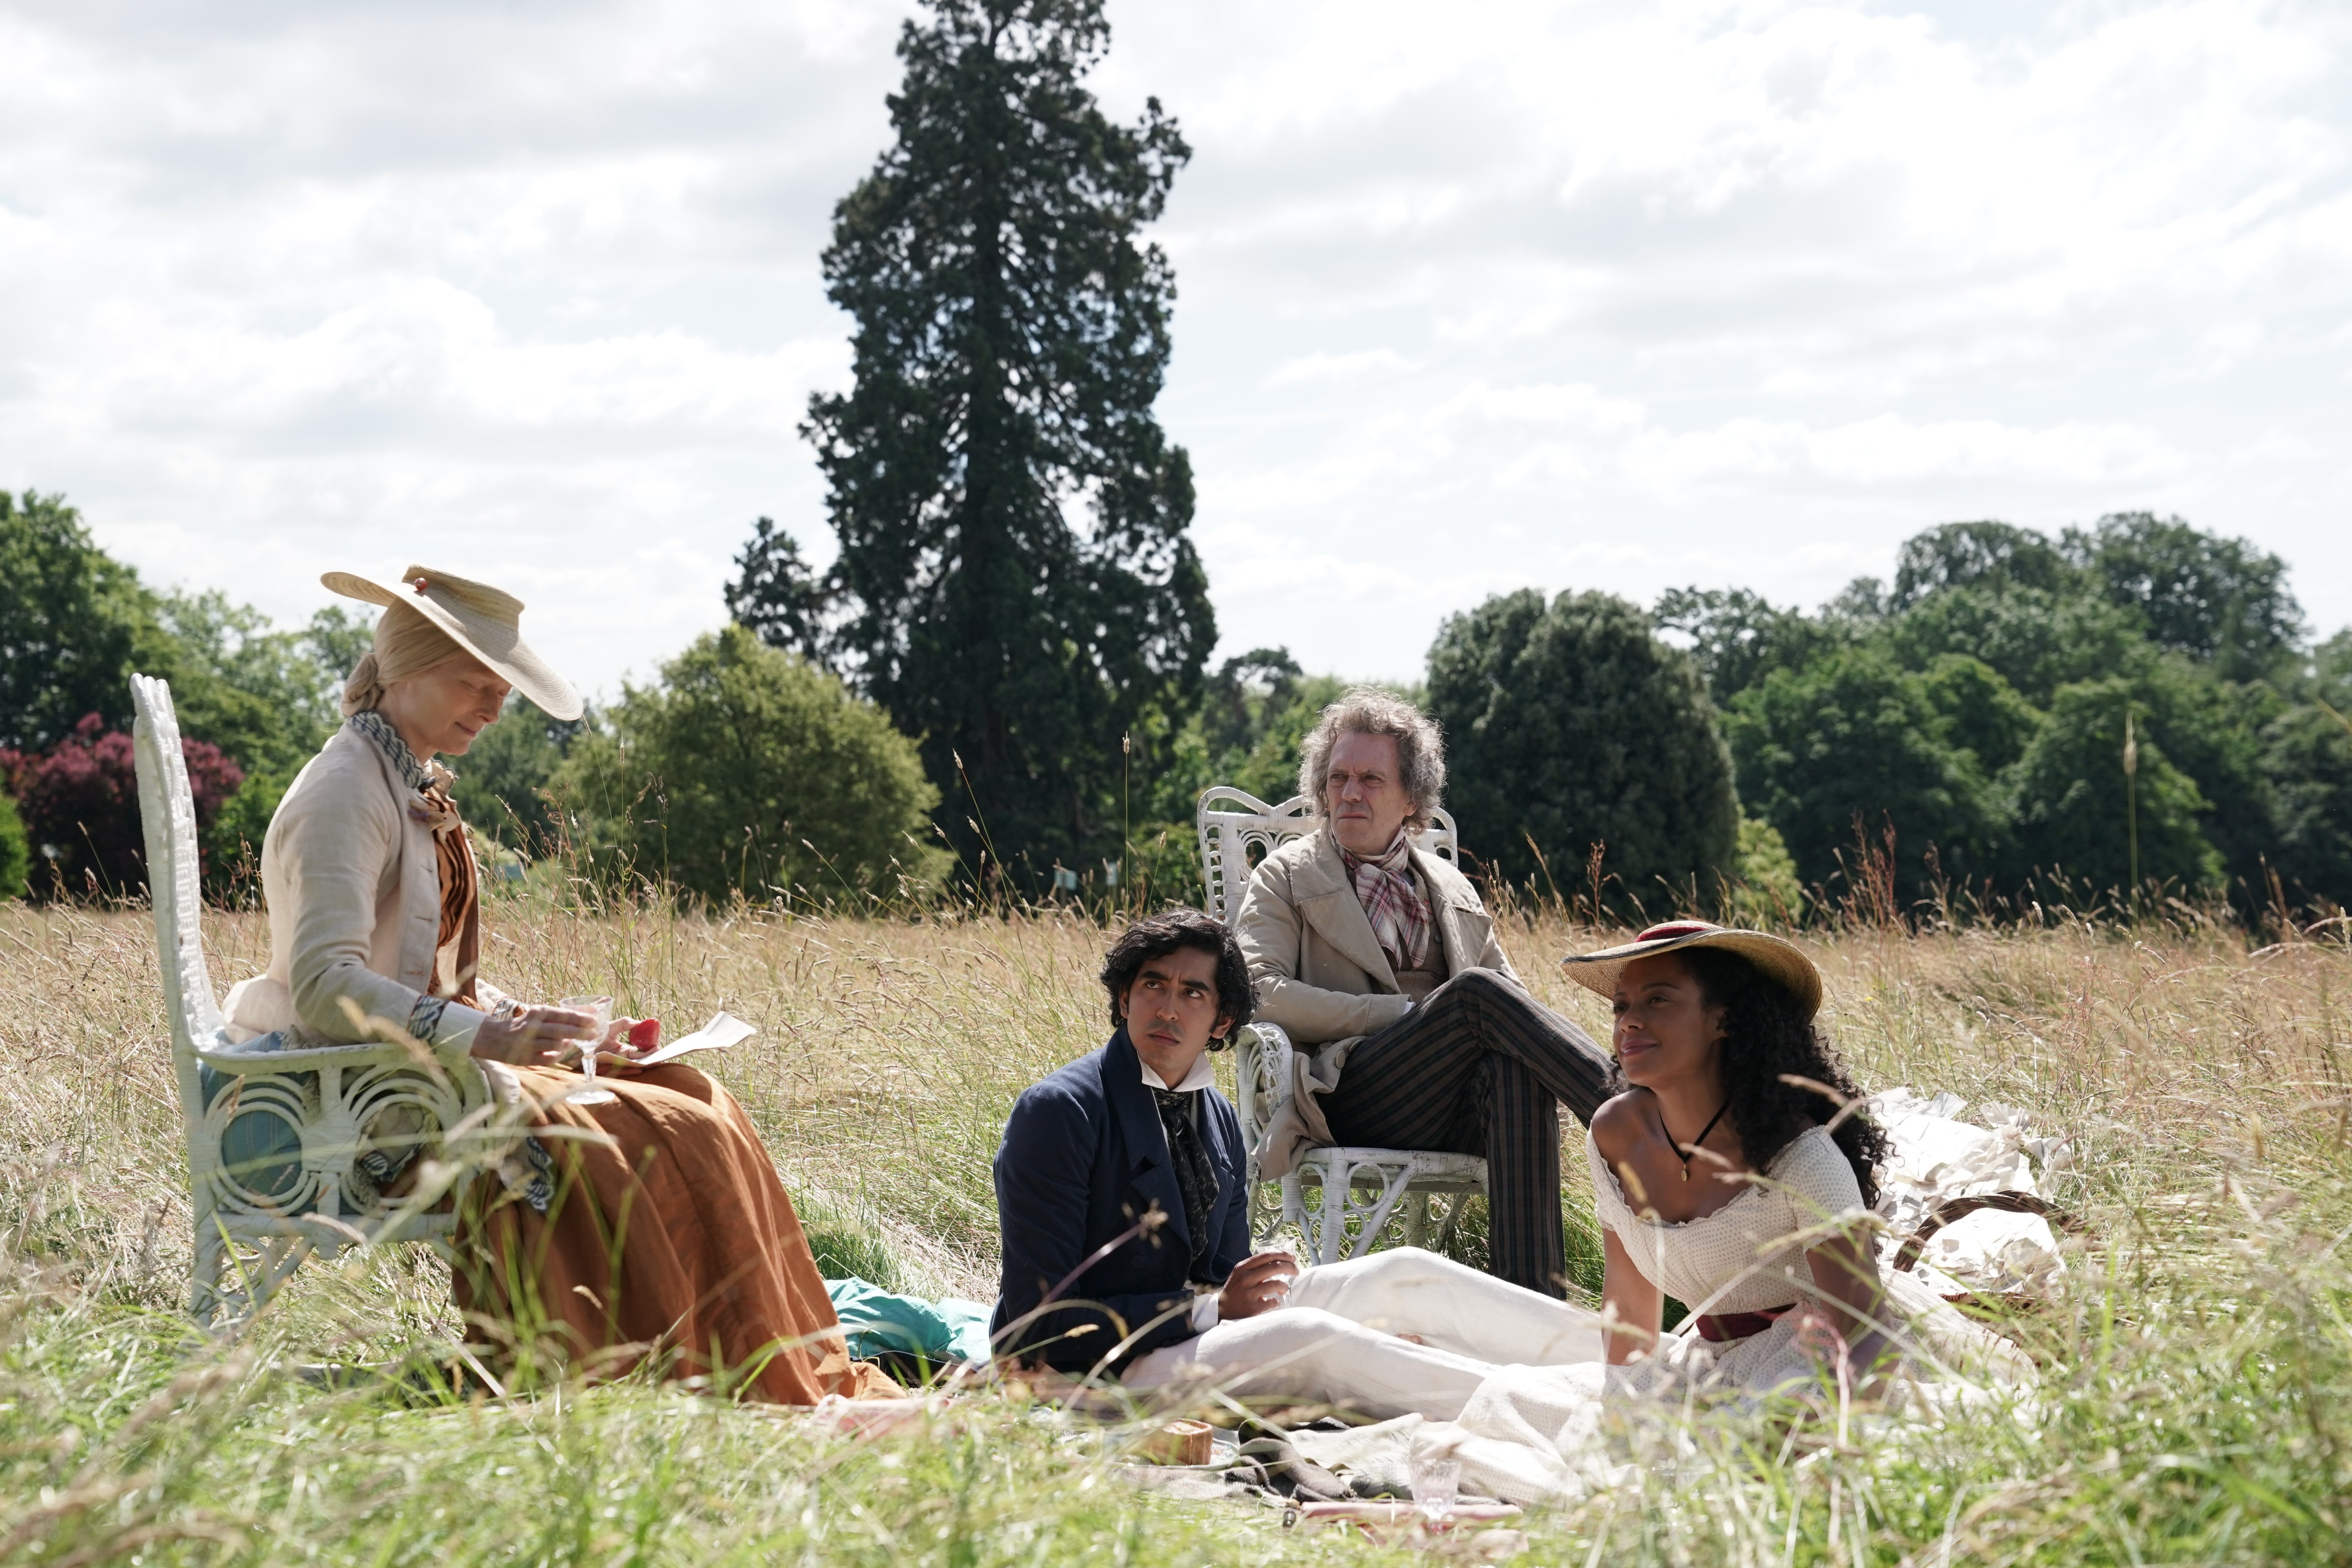 Tilda Swinton, Dev Patel, Hugh Laurie and Rosalind Eleazar in 'The Personal History of David Copperfield' (Dean Rogers. © 2020 20th Century Studios All Rights Reserved)